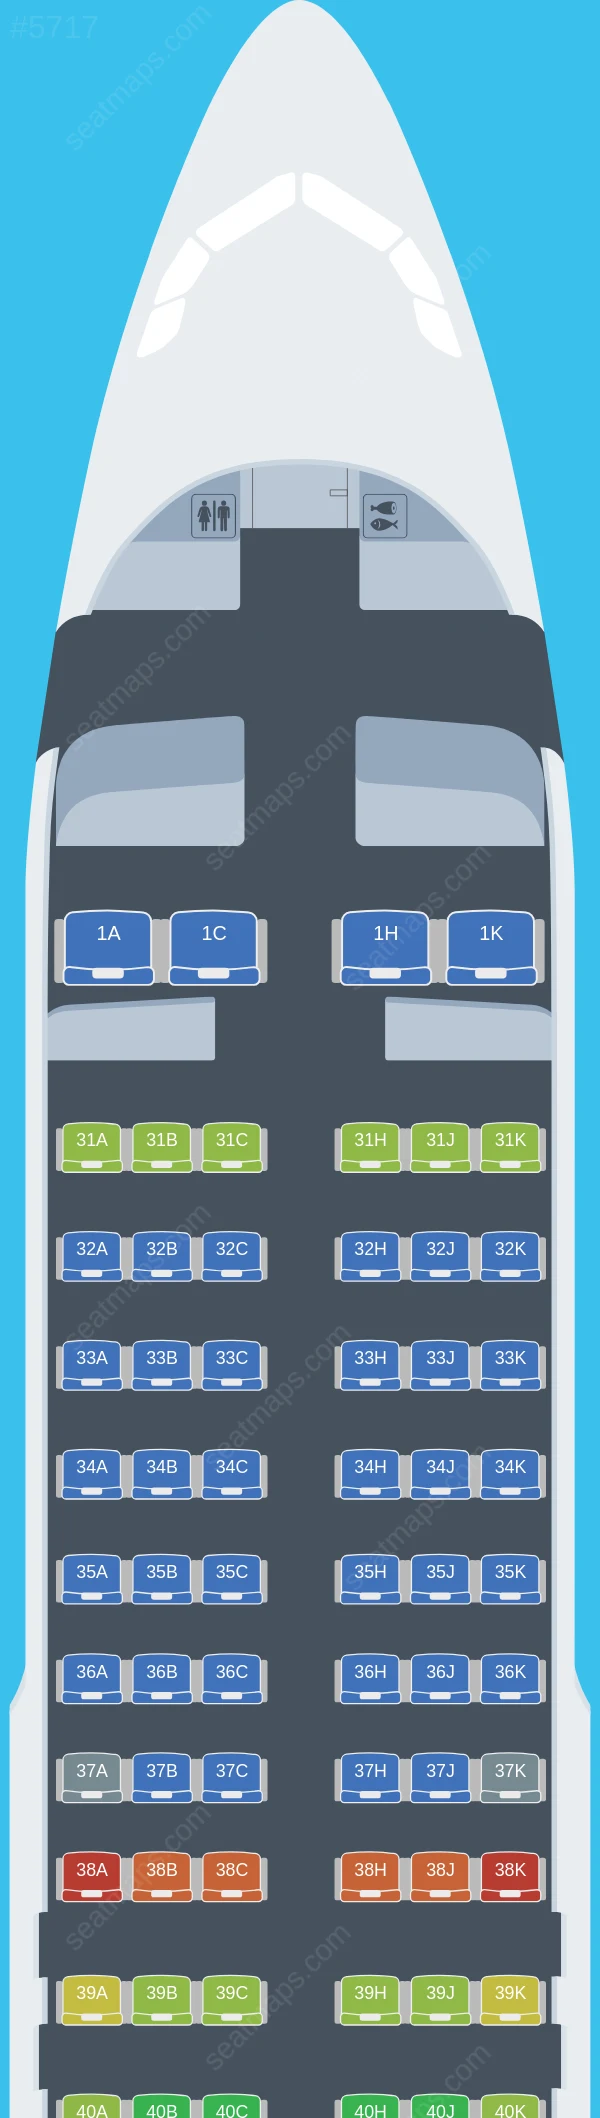 China Southern Airbus A320neo seatmap preview